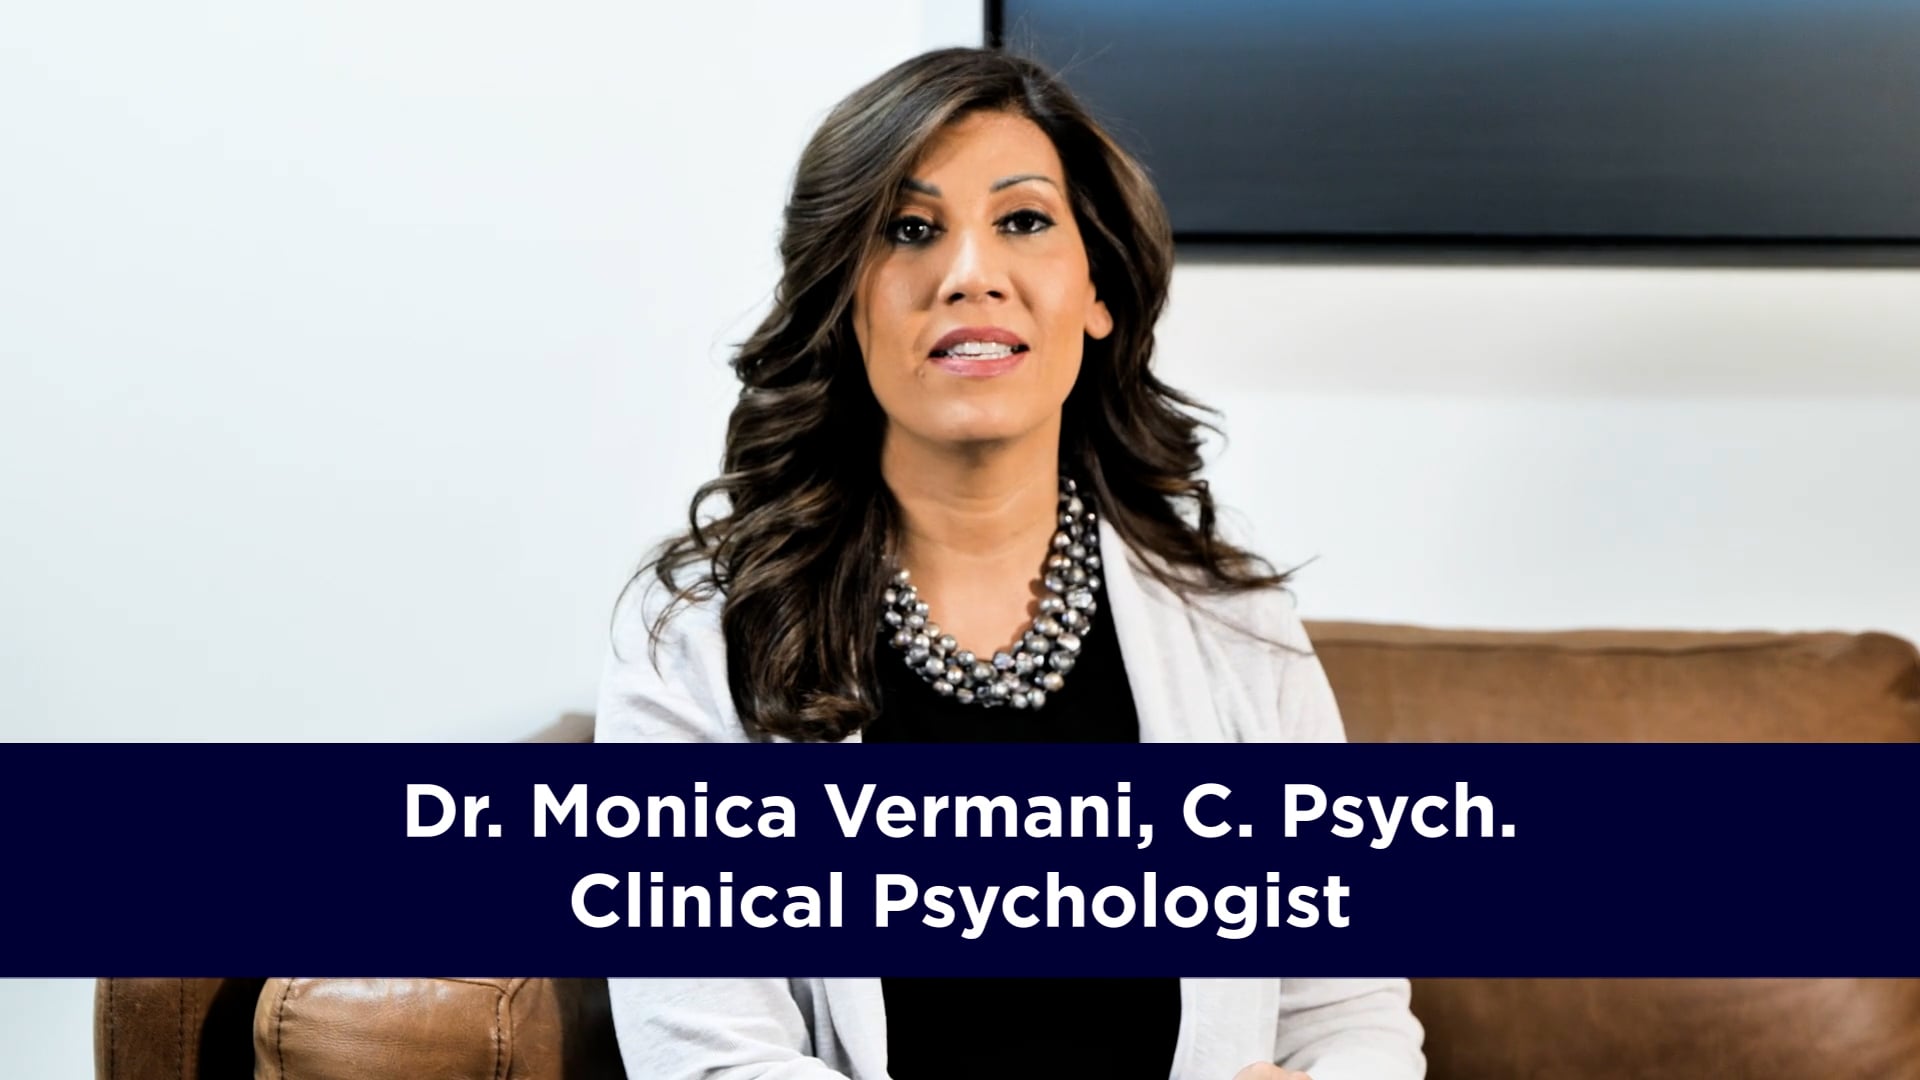 Dr. Monica Vermani 
Your life is important